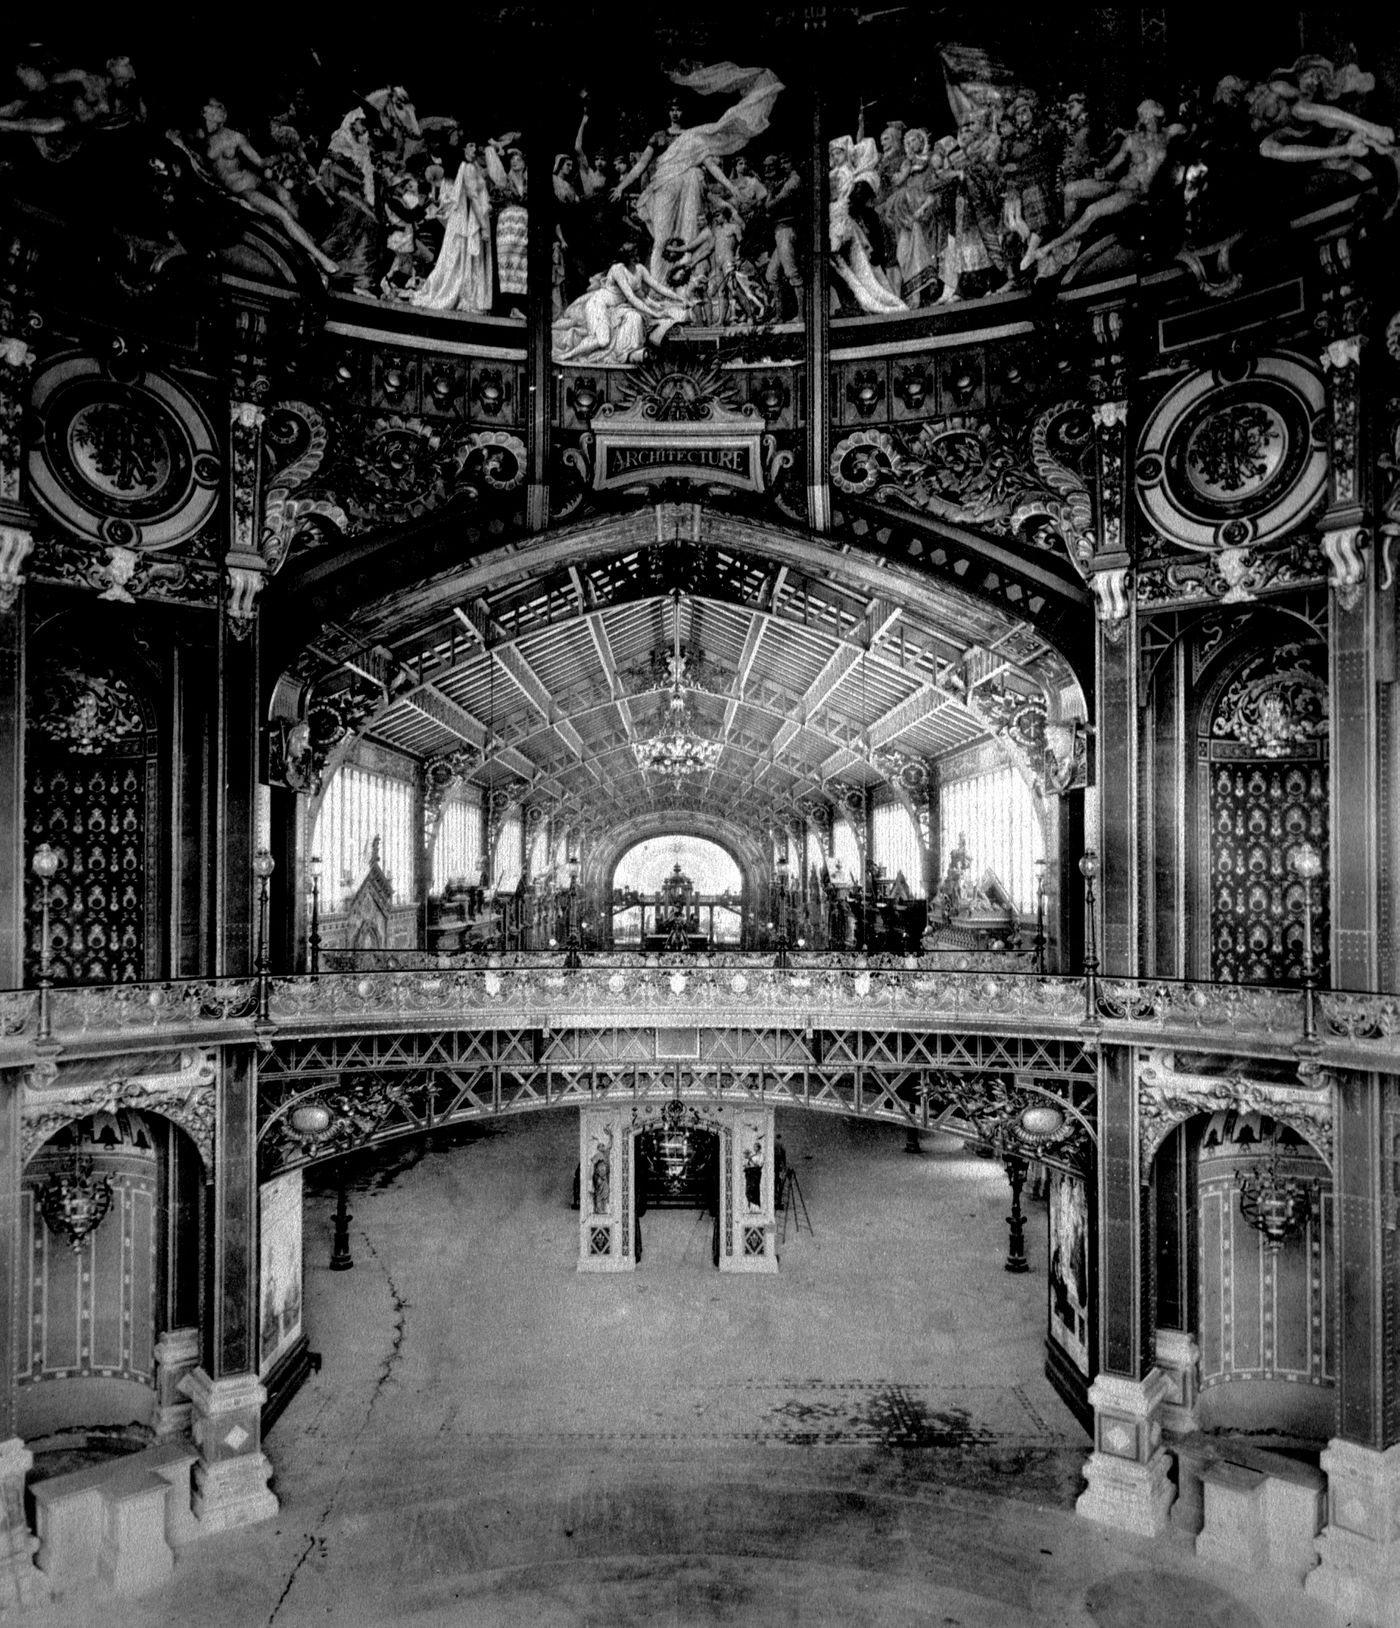 Exposition universelle de 1889 (Paris, France): View of interior of exposition hall